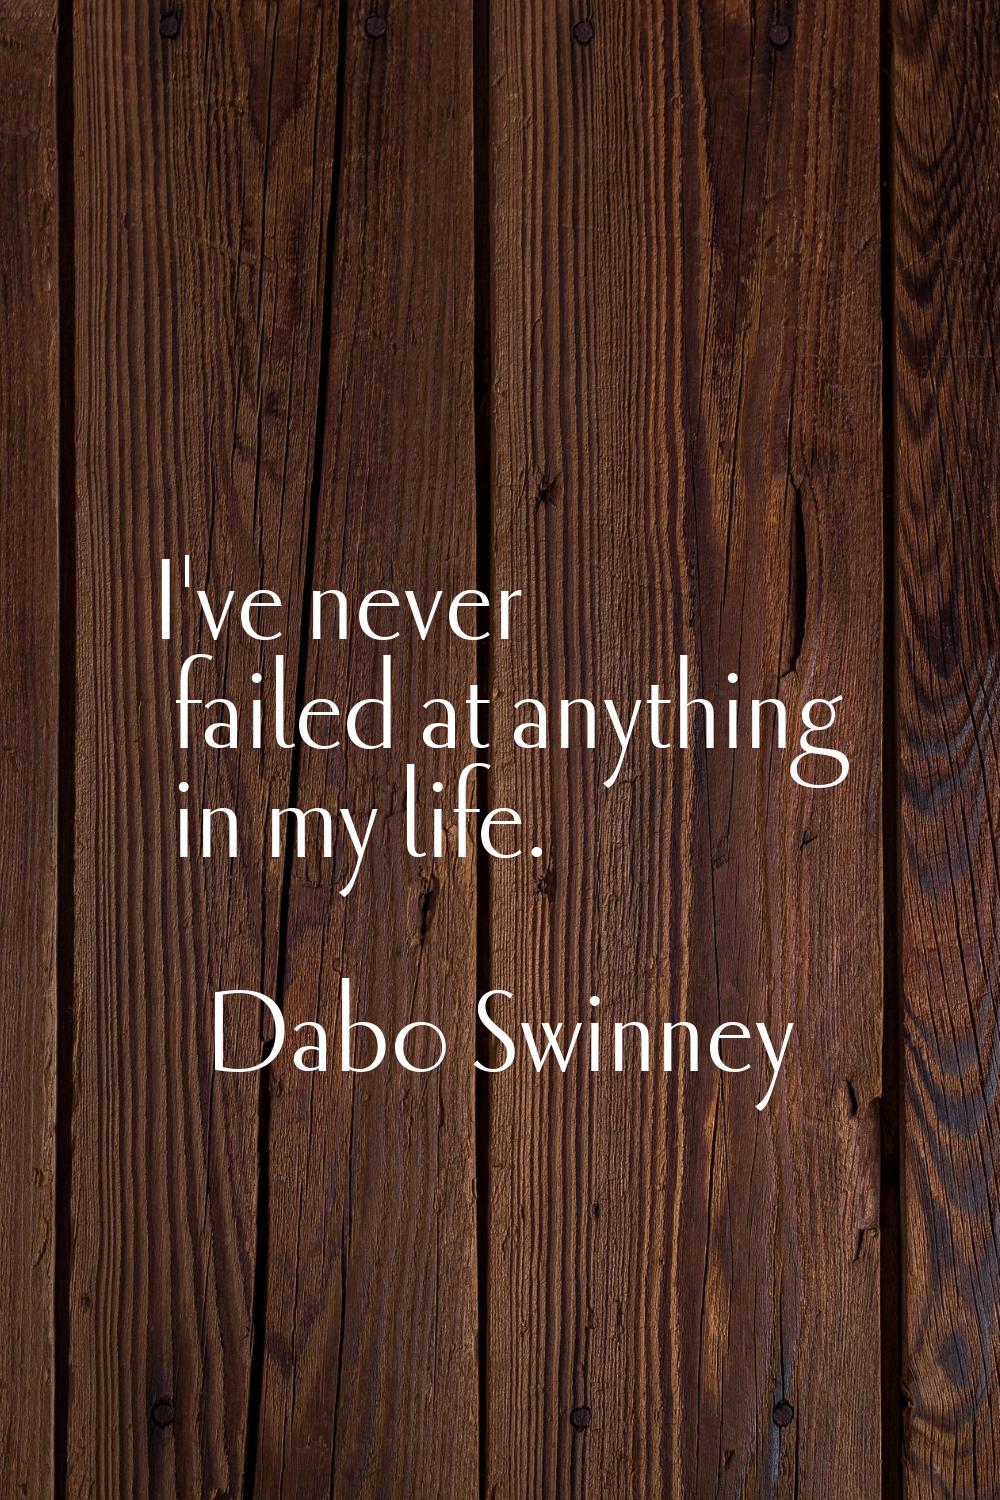 I've never failed at anything in my life.